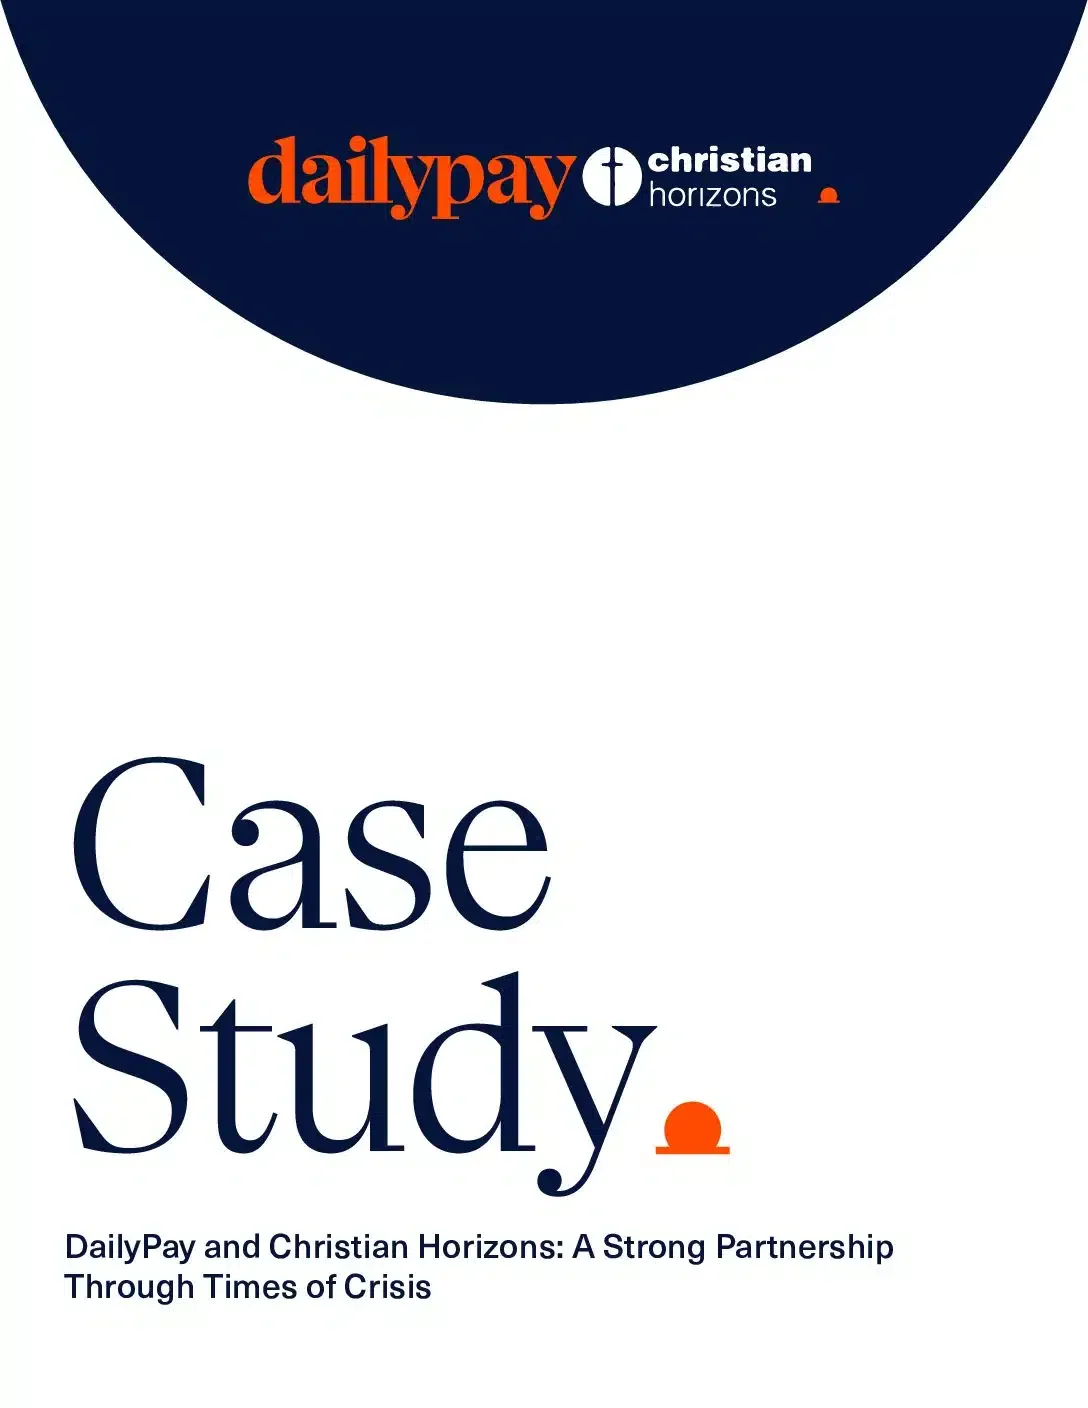 Cover page of a case study titled "DailyPay and Christian Horizons: A Strong Partnership Through Times of Crisis," featuring the logos of DailyPay and Christian Horizons.